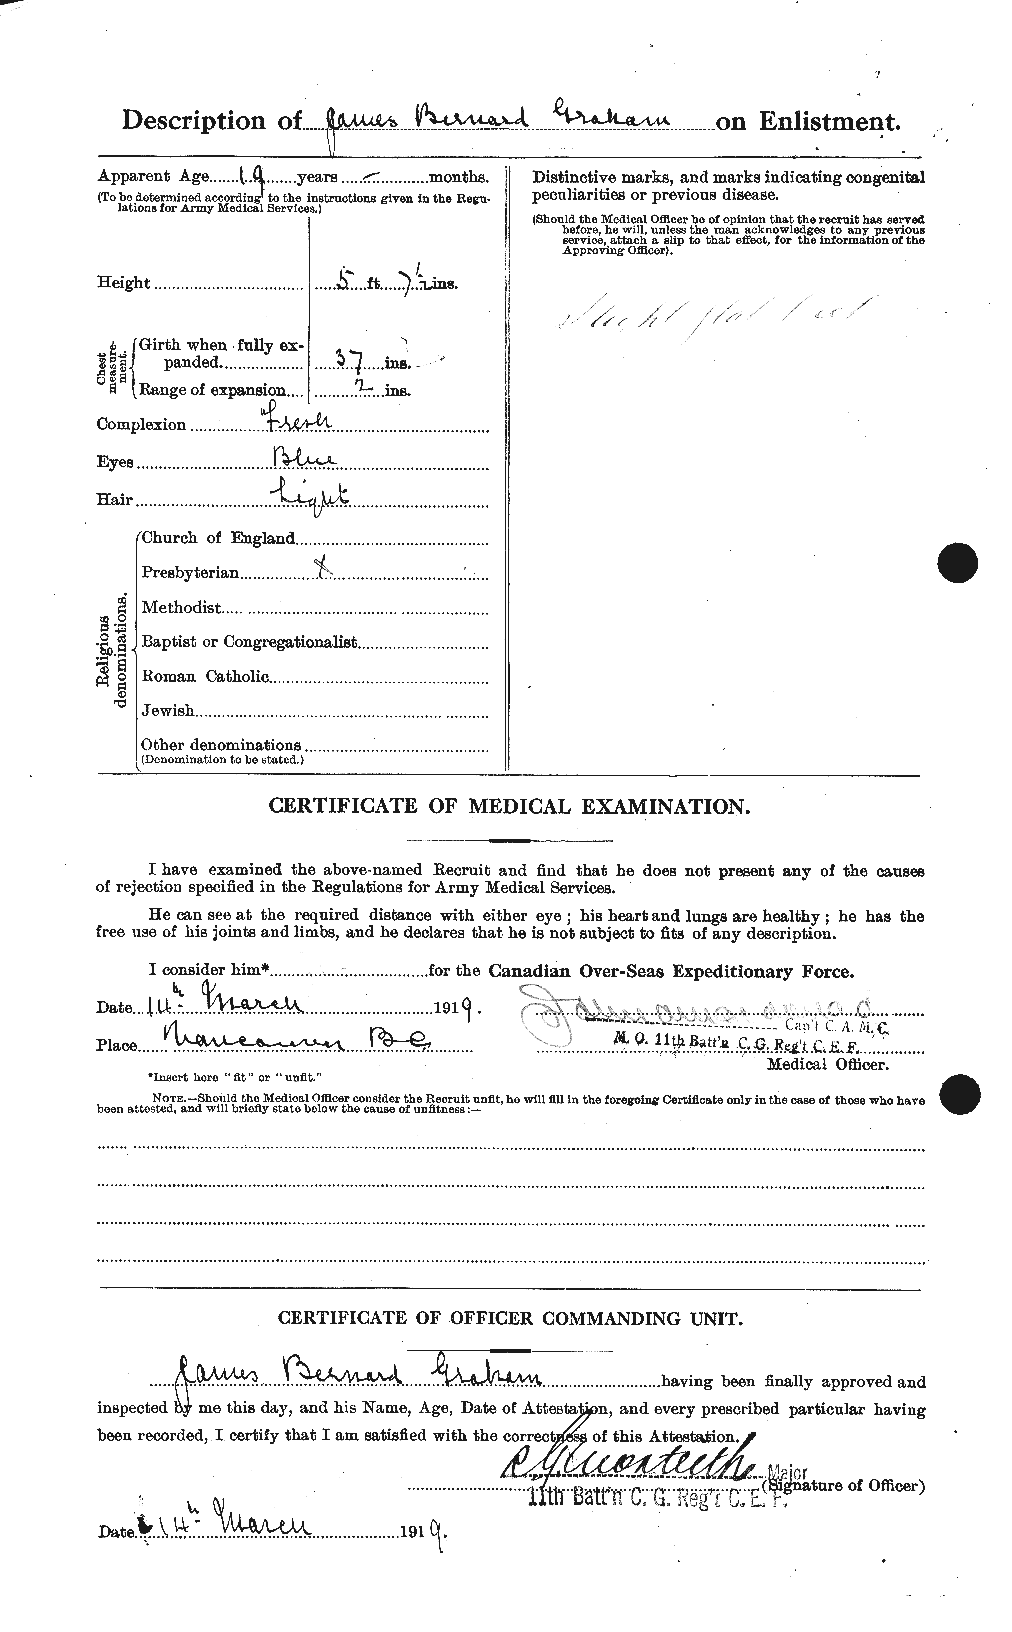 Personnel Records of the First World War - CEF 357806b